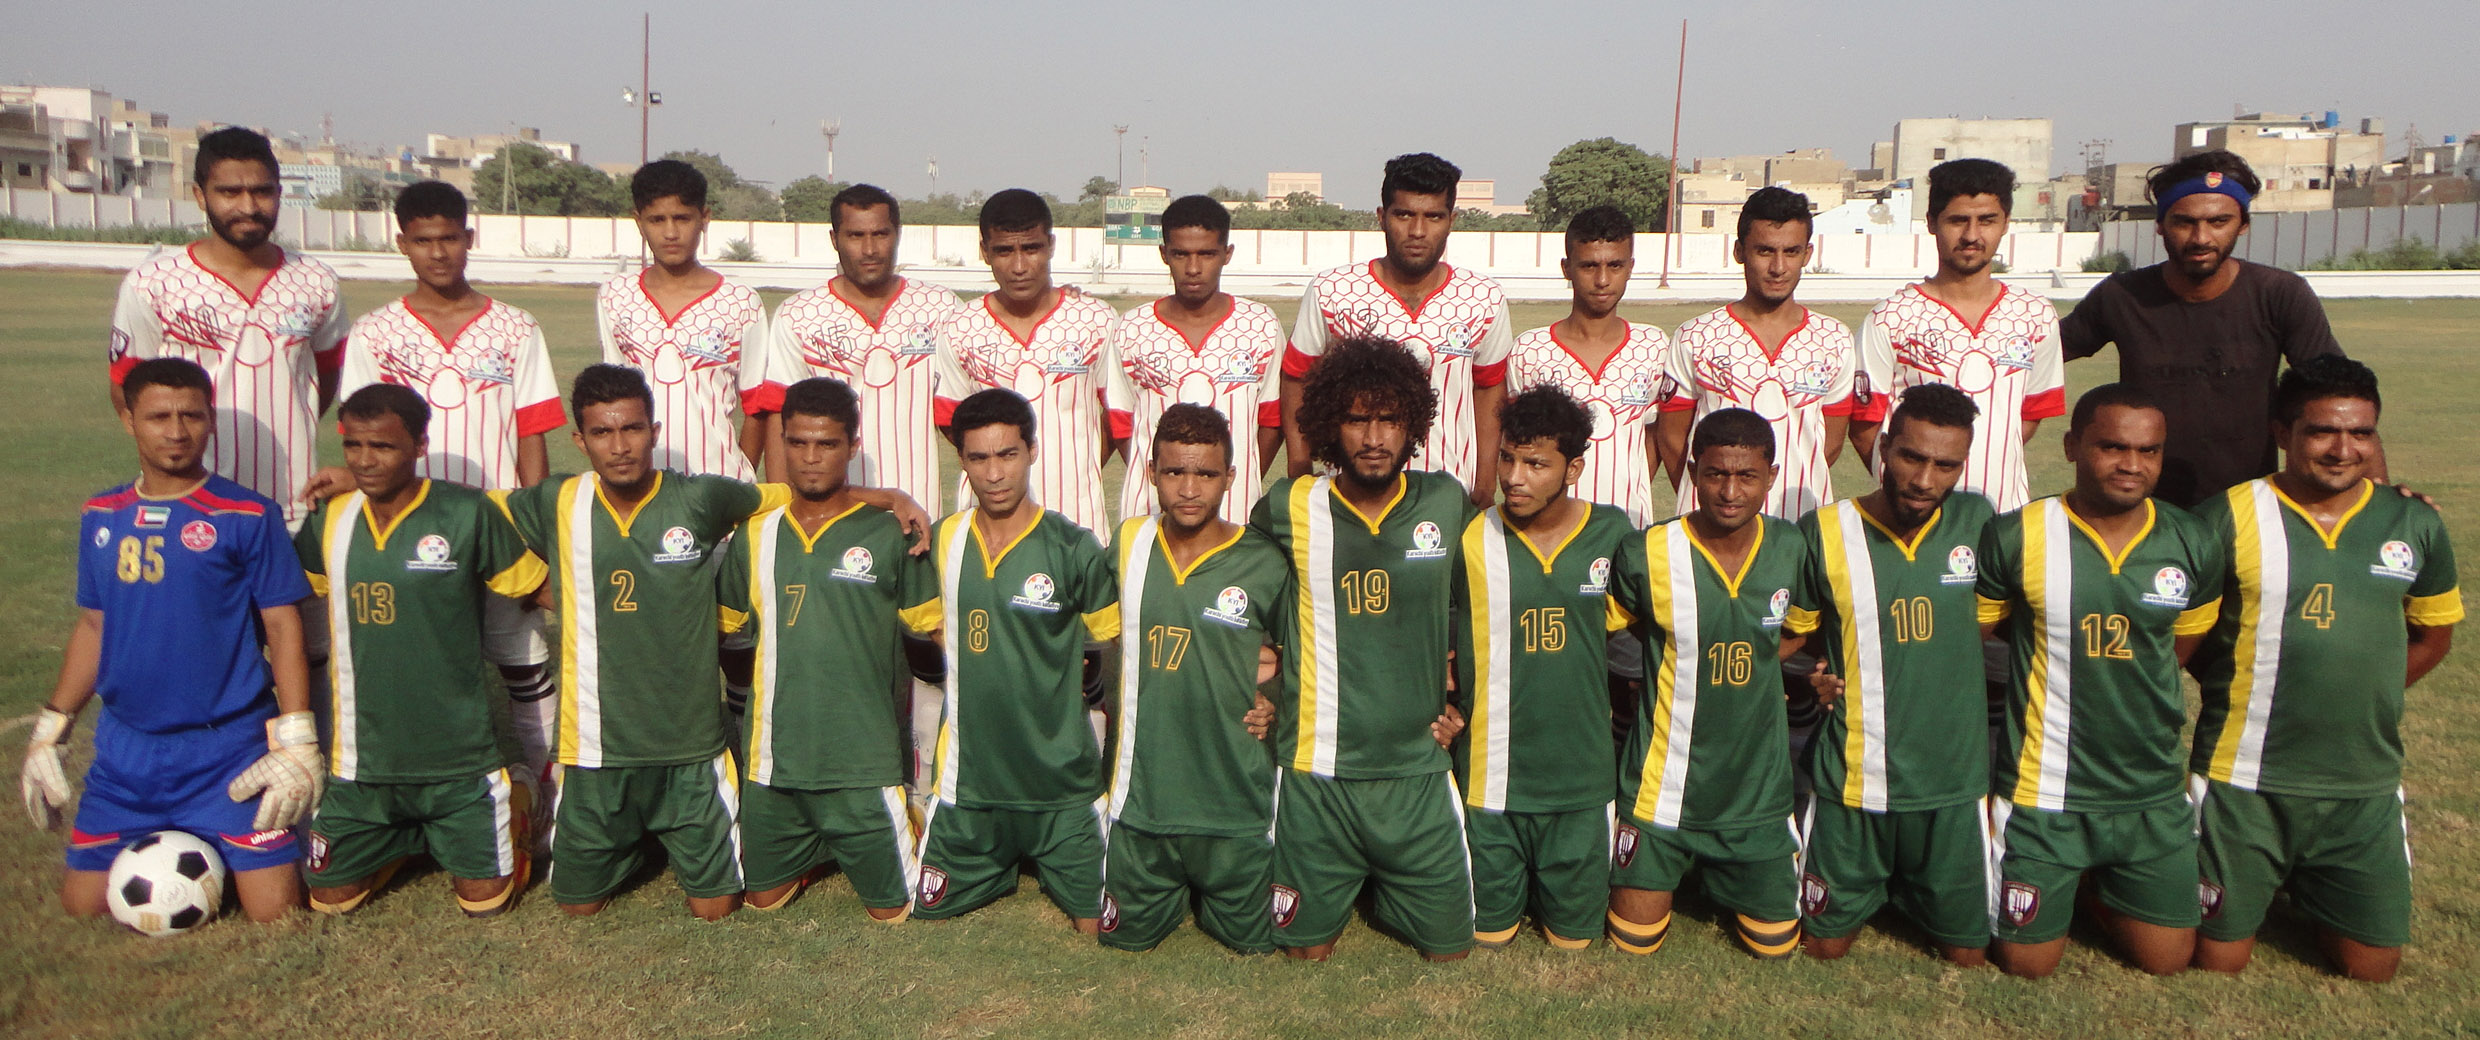 Two more matches of Group “B” have been decided in 13th Karachi Football League